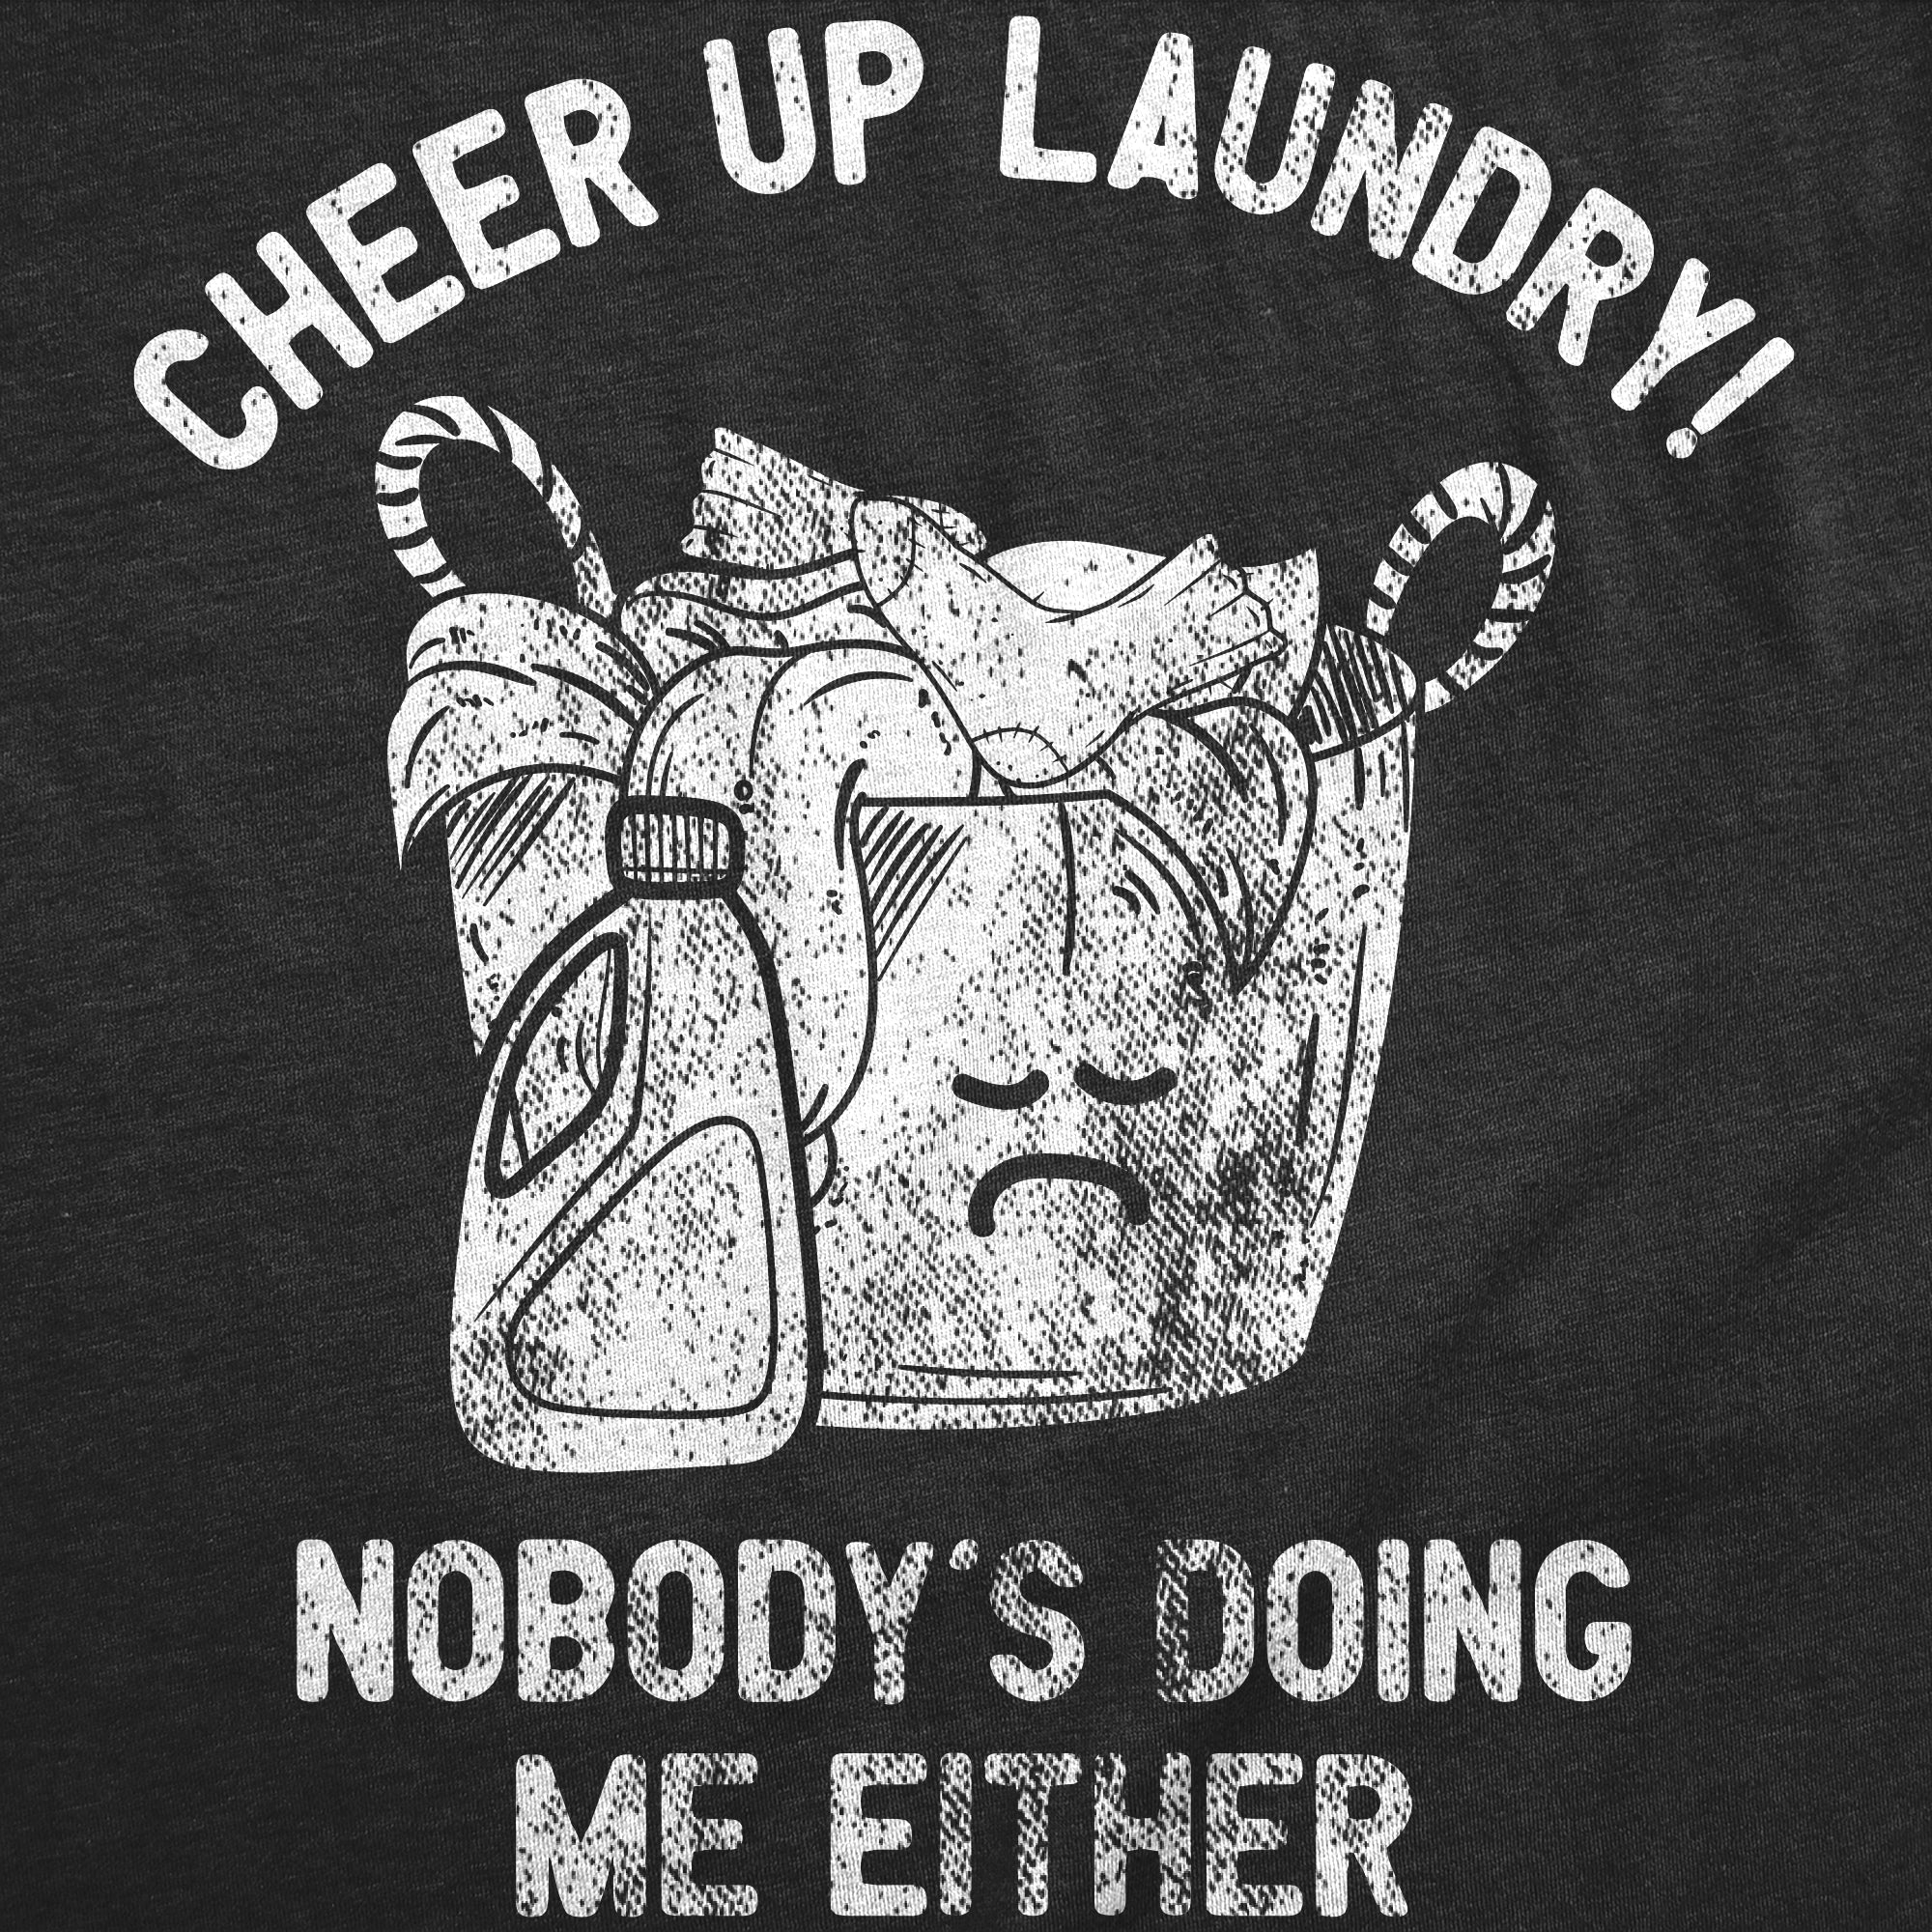 Funny Heather Black - Cheer Up Laundry Cheer Up Laundry Nobodys Doing Me Either Mens T Shirt Nerdy sarcastic Tee